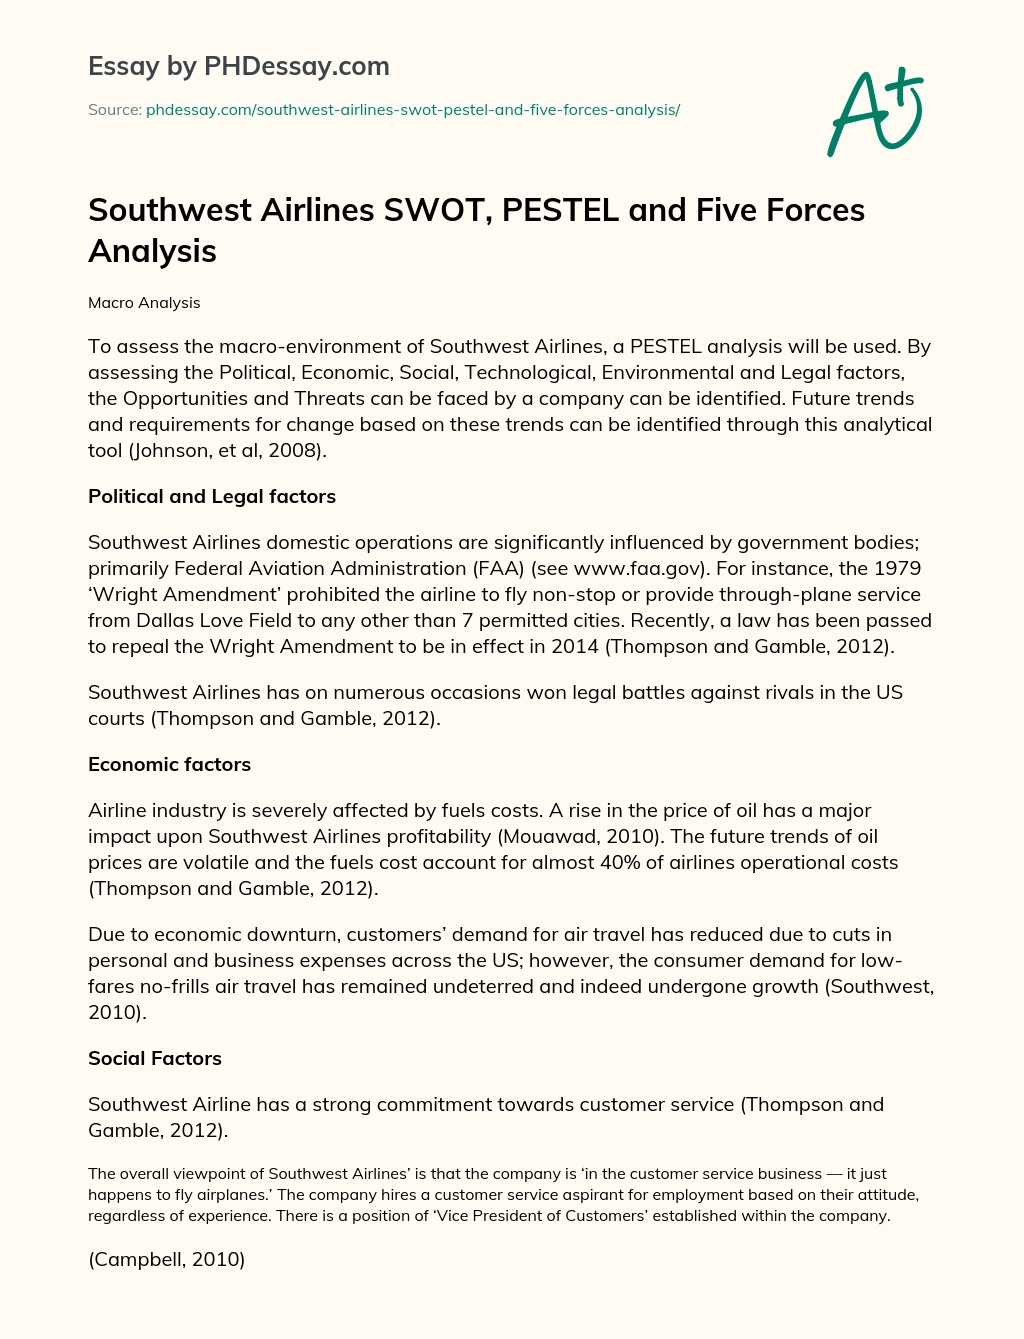 Southwest Airlines SWOT, PESTEL and Five Forces Analysis essay